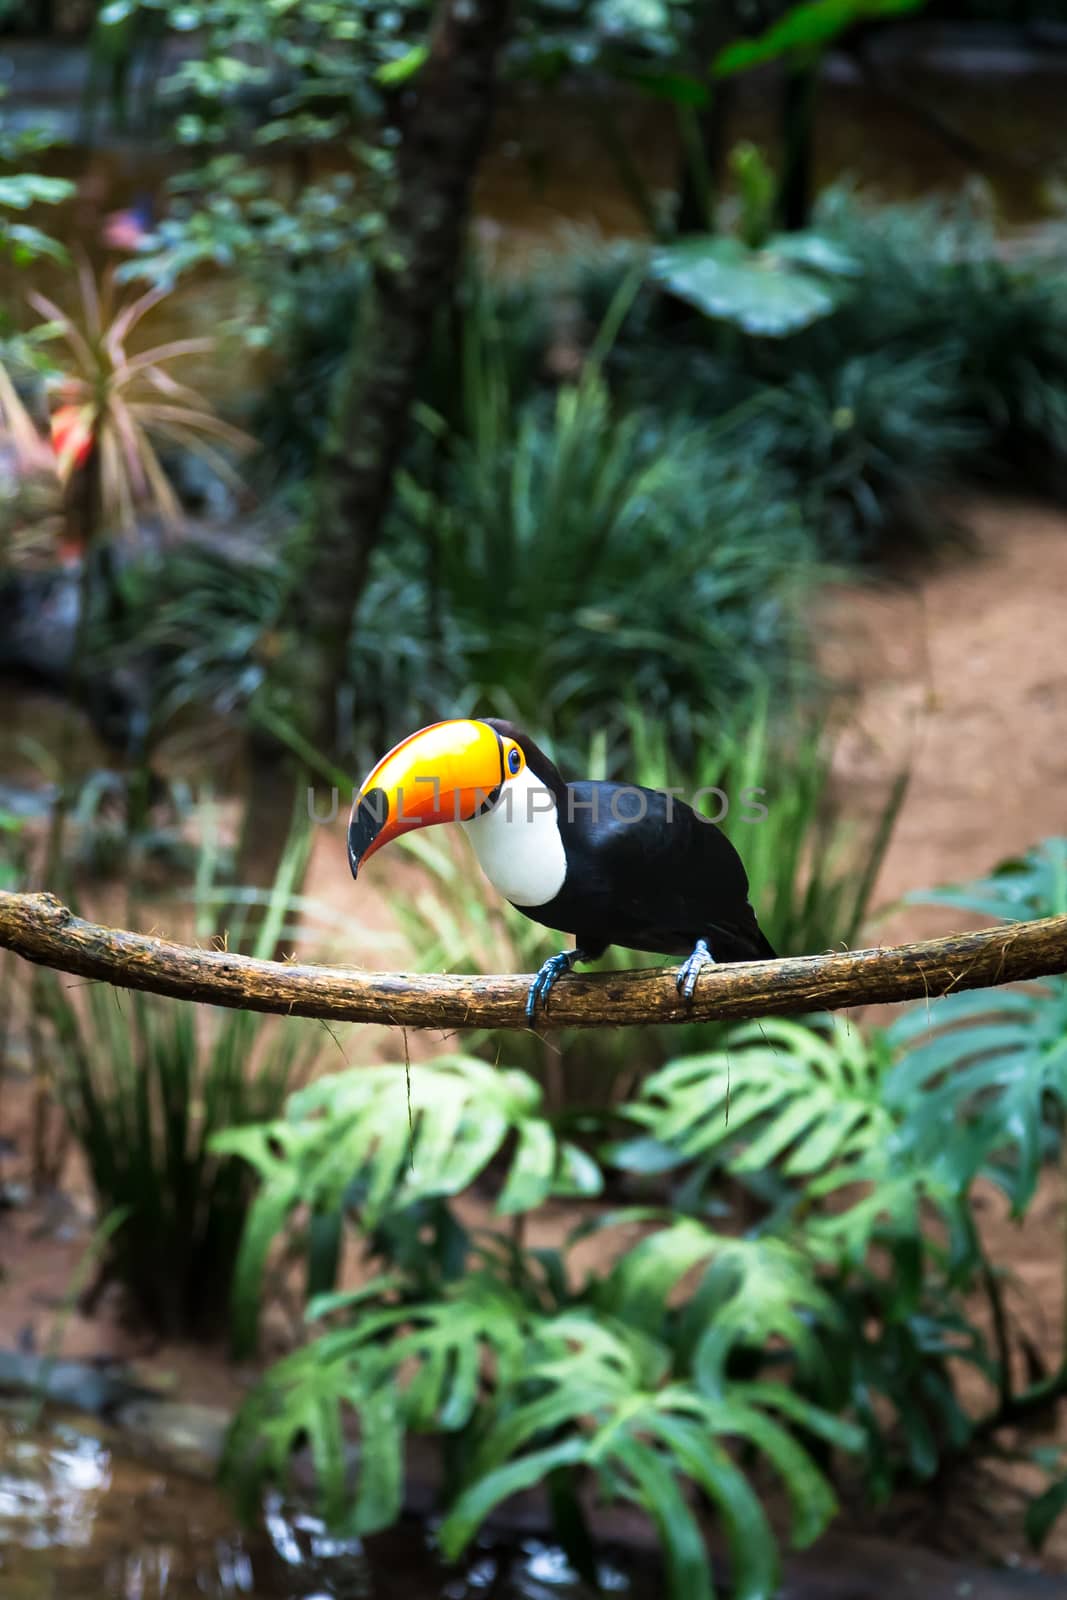 Toucan on the branch in tropical forest of Brazil by SeuMelhorClick